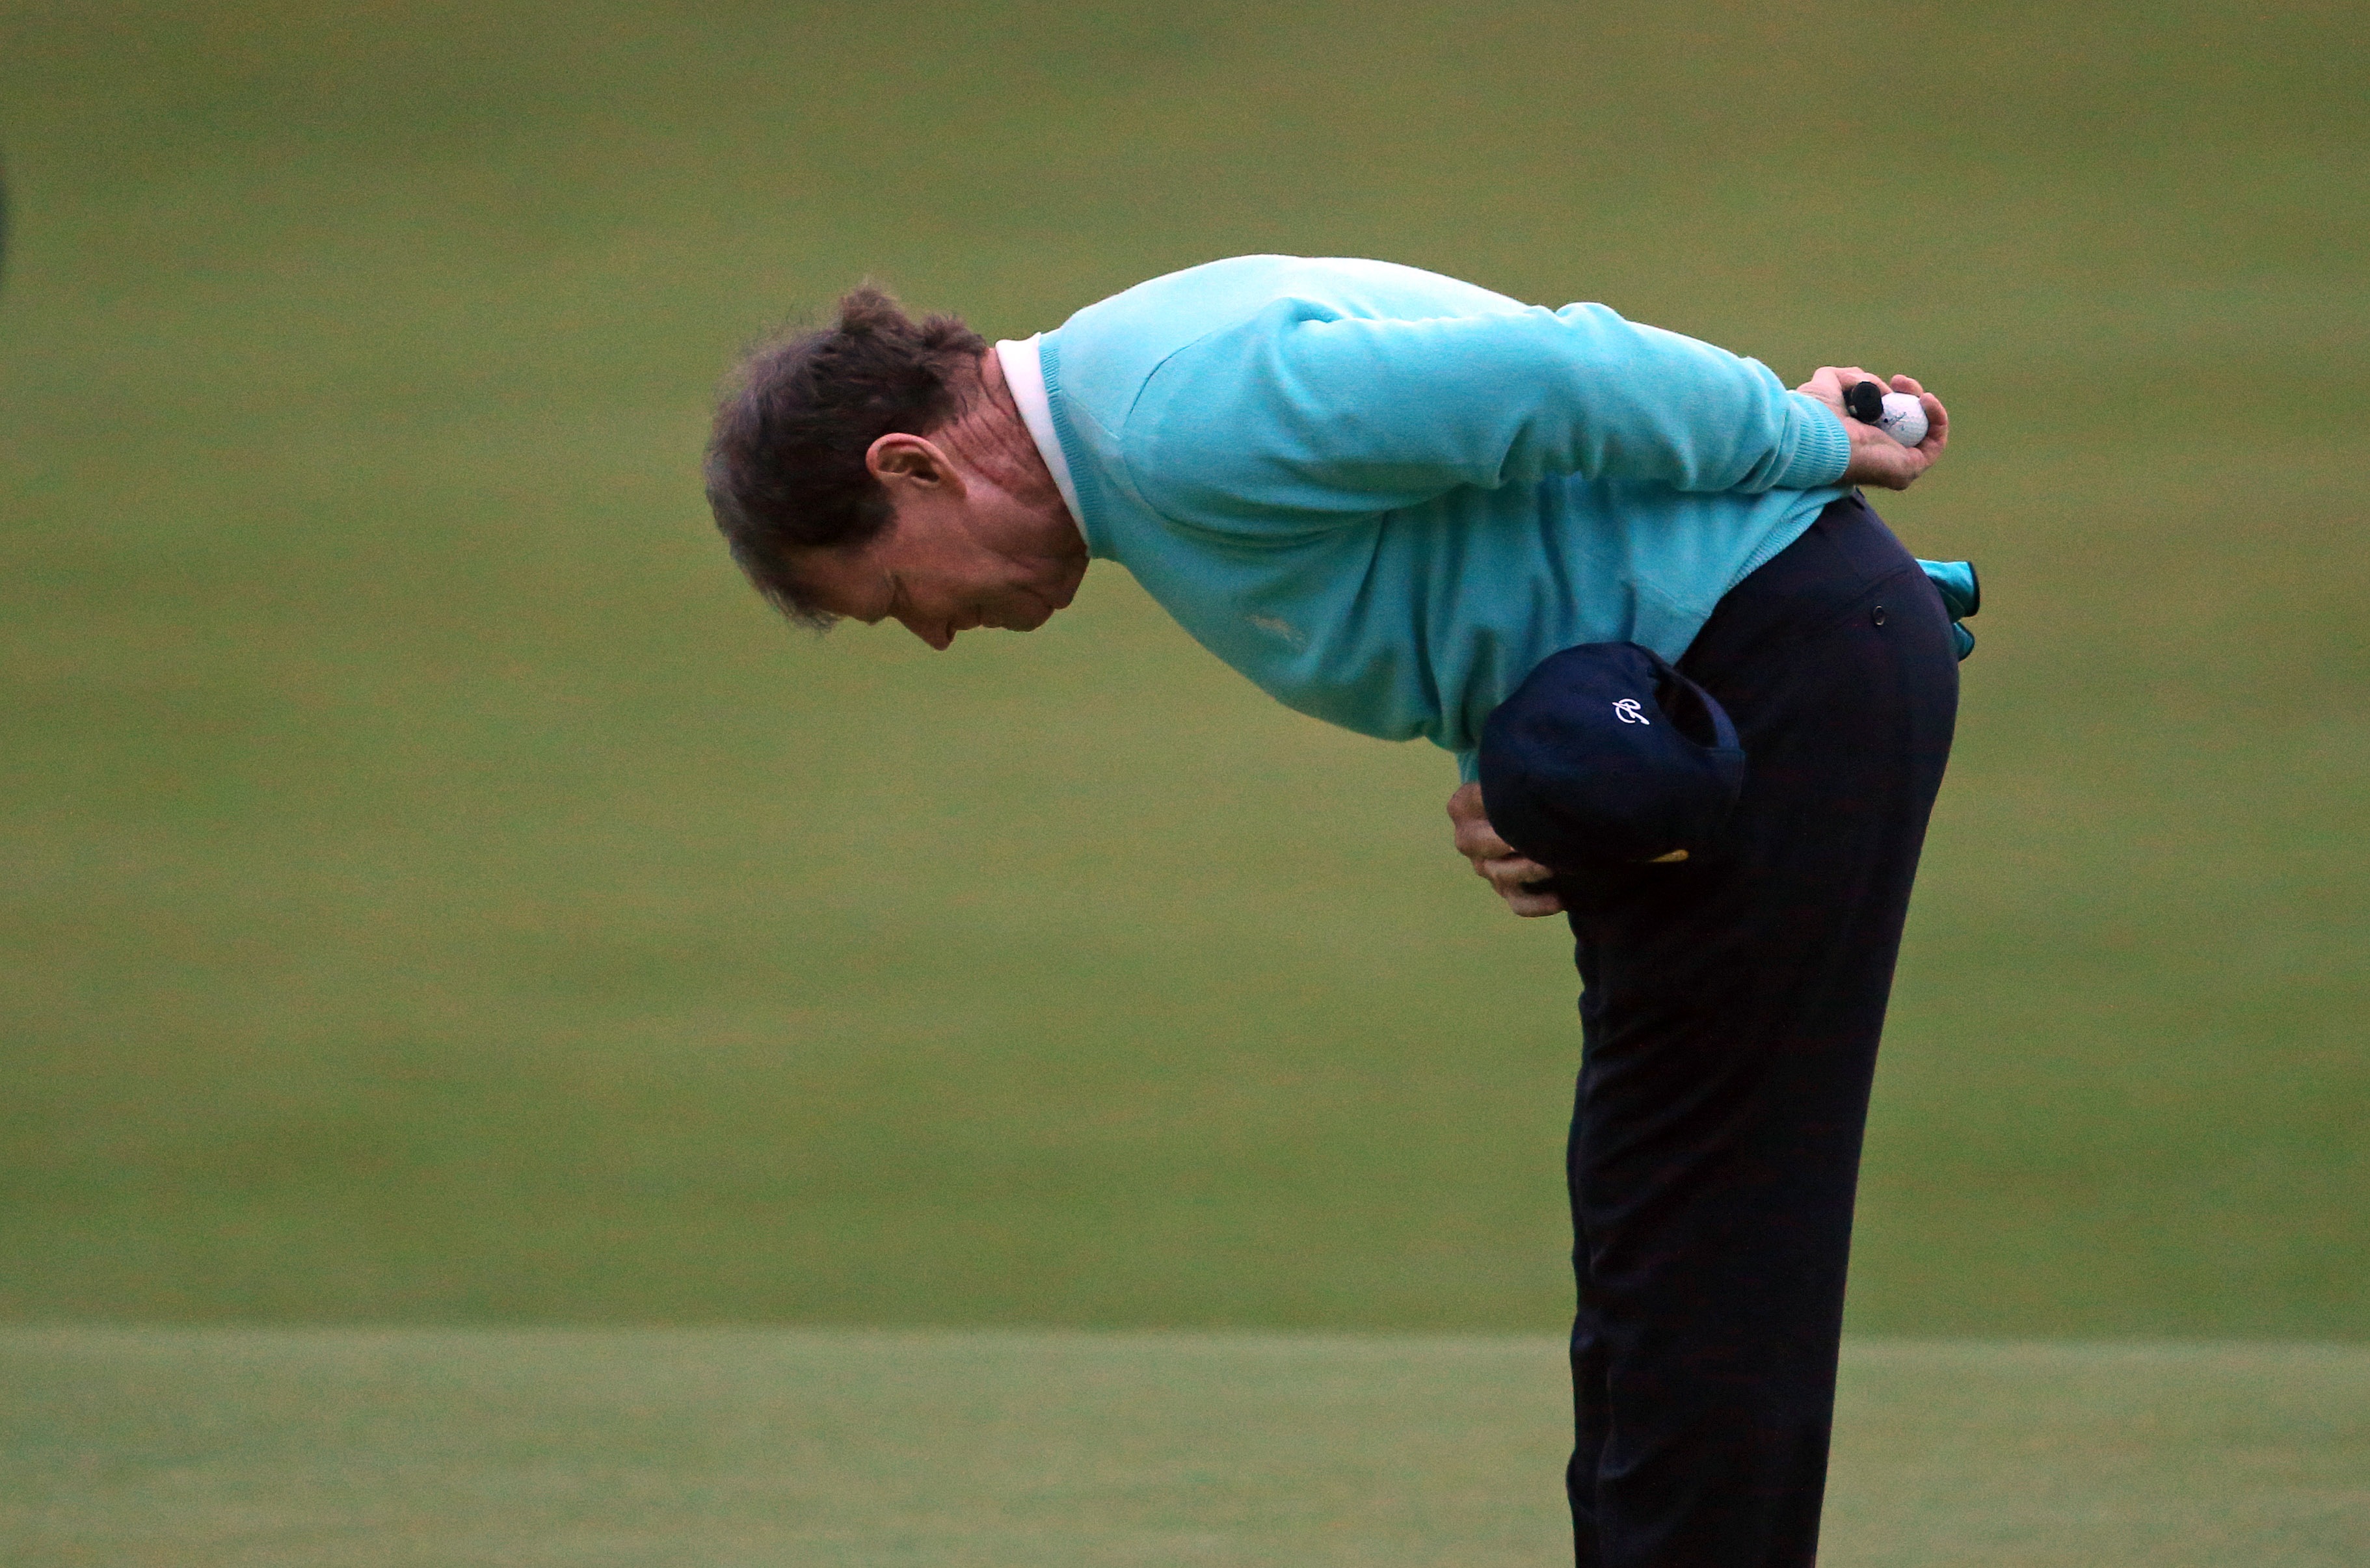 Tom Watson bows to the crowd after finishing on the 18th green. (AP)